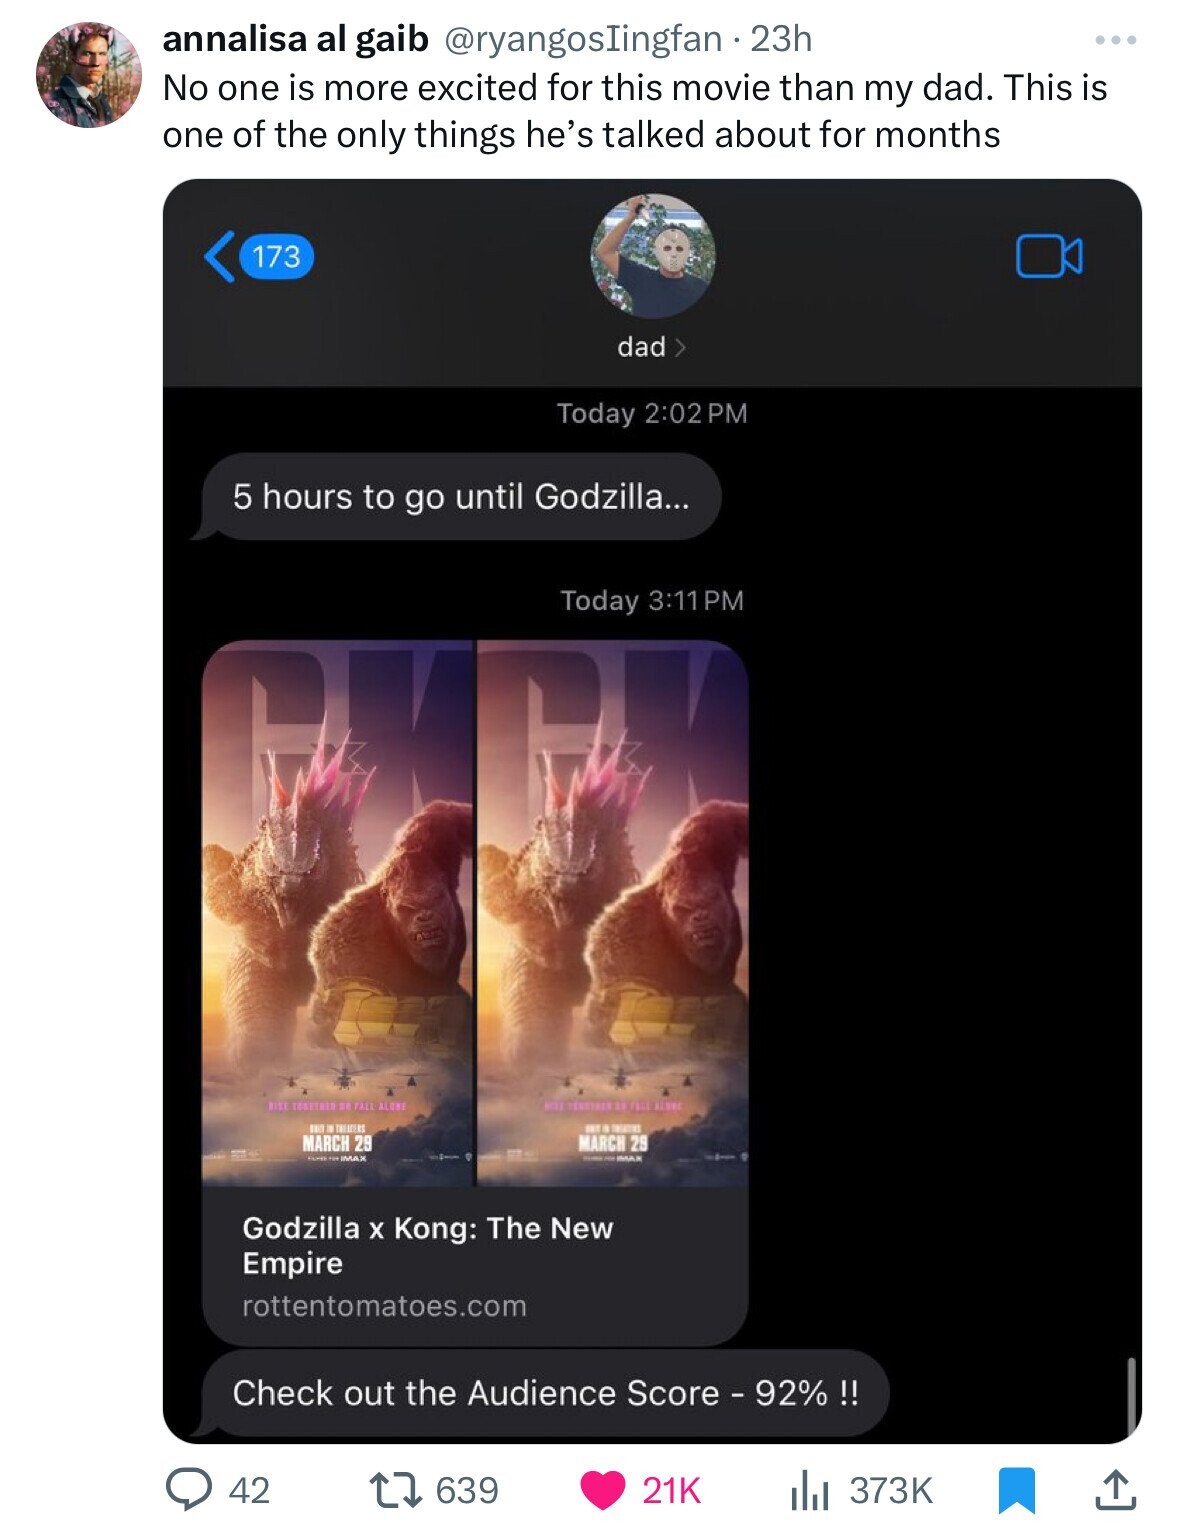 screenshot - annalisa al gaib 23h No one is more excited for this movie than my dad. This is one of the only things he's talked about for months 173 dad > Today 5 hours to go until Godzilla... Rise Together So Fall Alobe March 29 Max Today March 29 Godzil